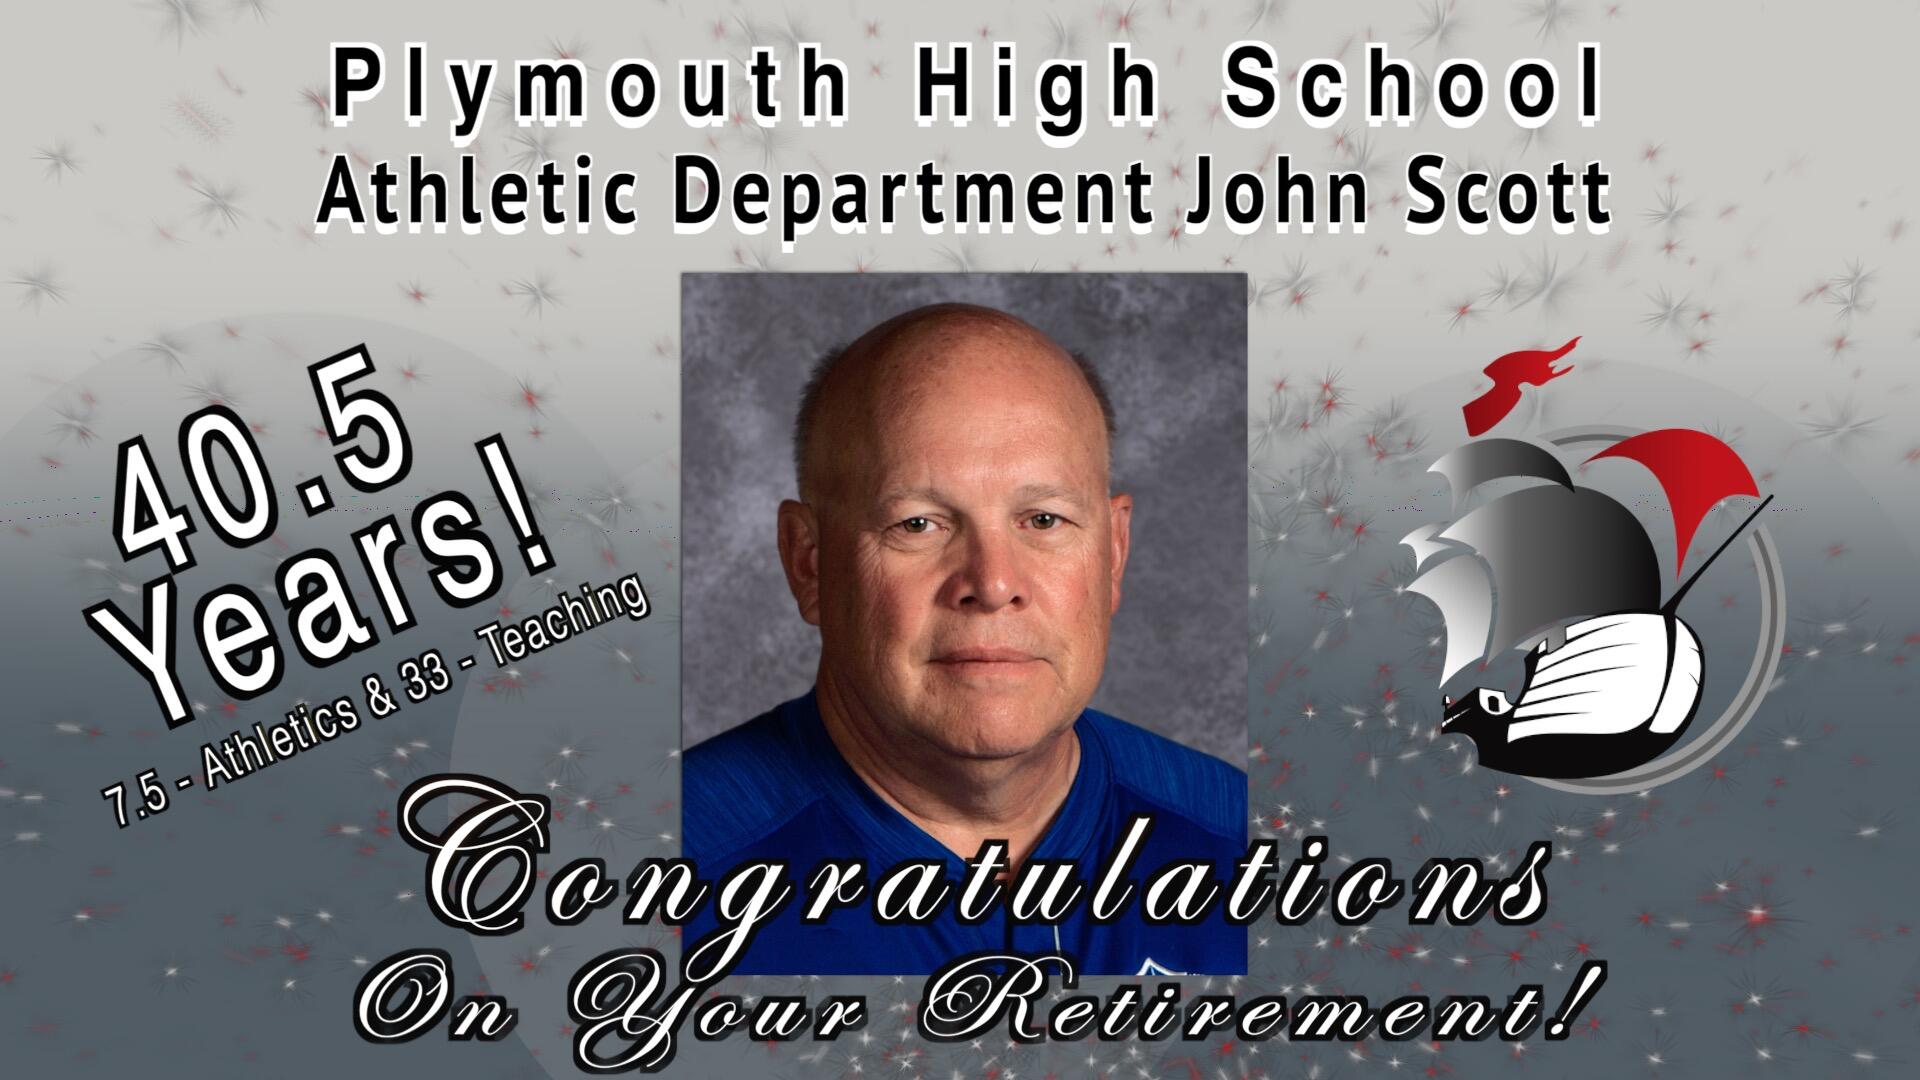 Plymouth High School Athletic Department John Scott 40.5(7.5 years athletics & 33 teaching) years! Congratulations on your retirement! photo and PHS ship logo